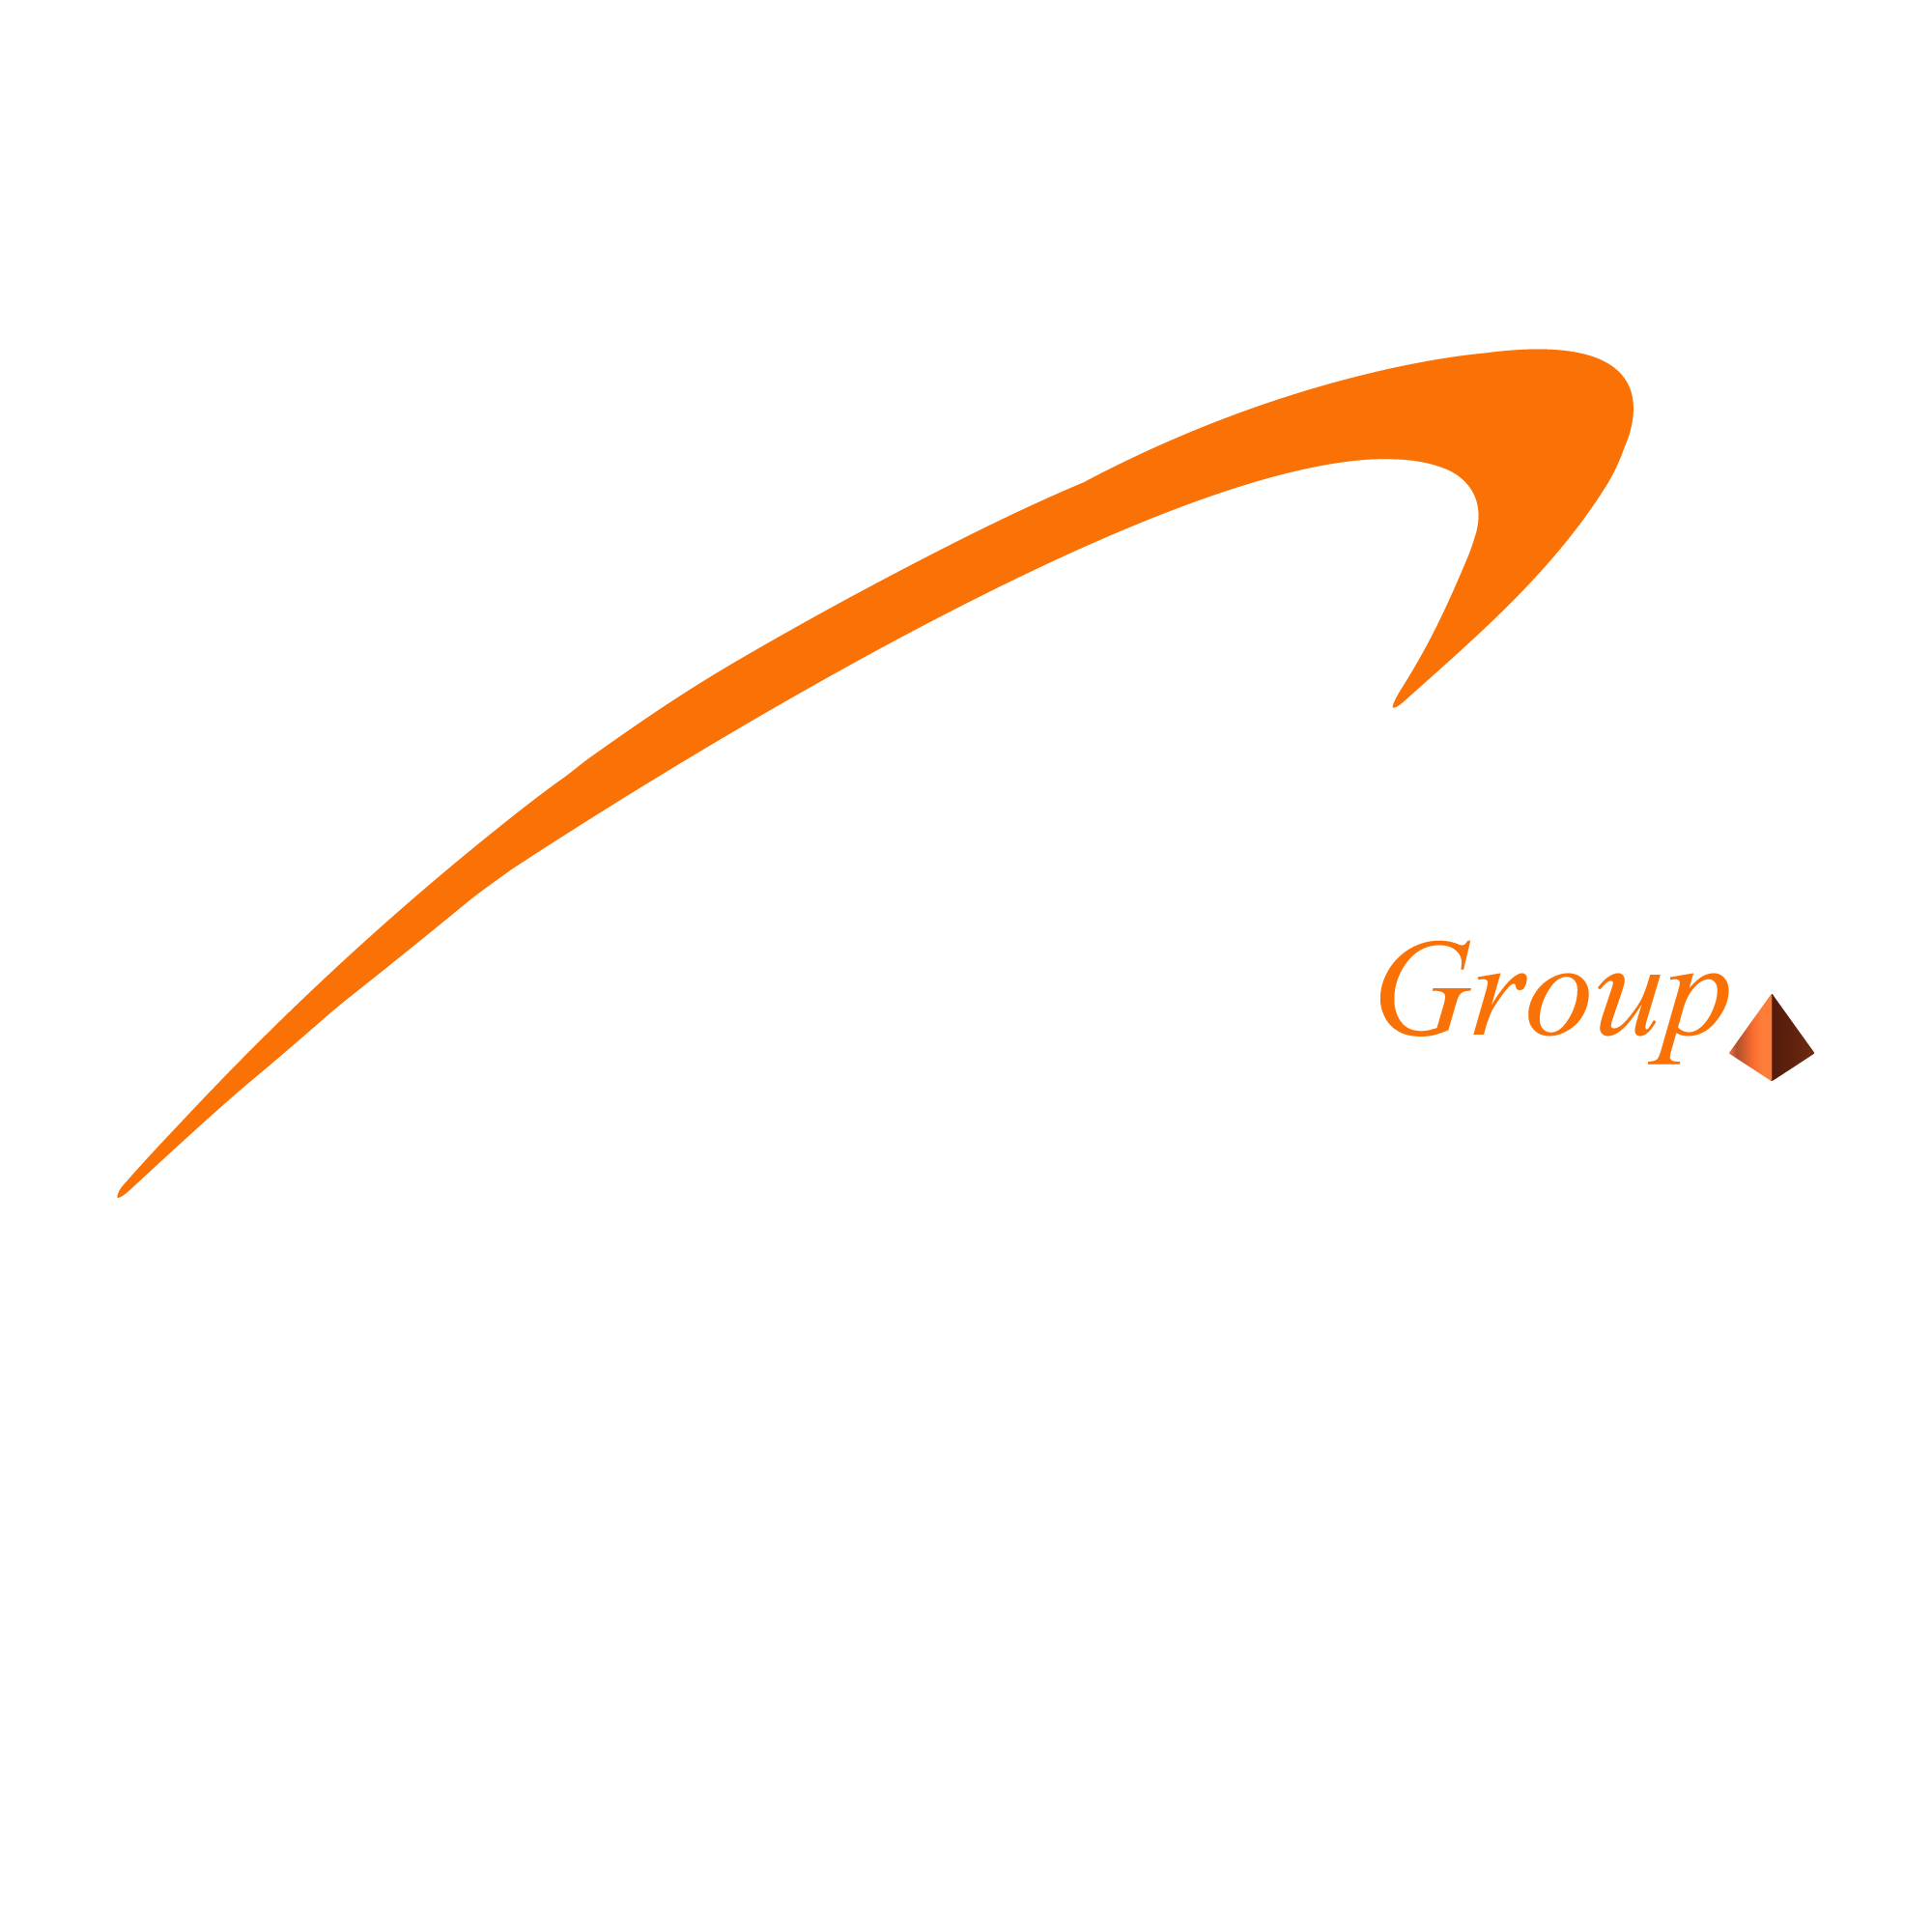 Egyptian Group Acc Official Website